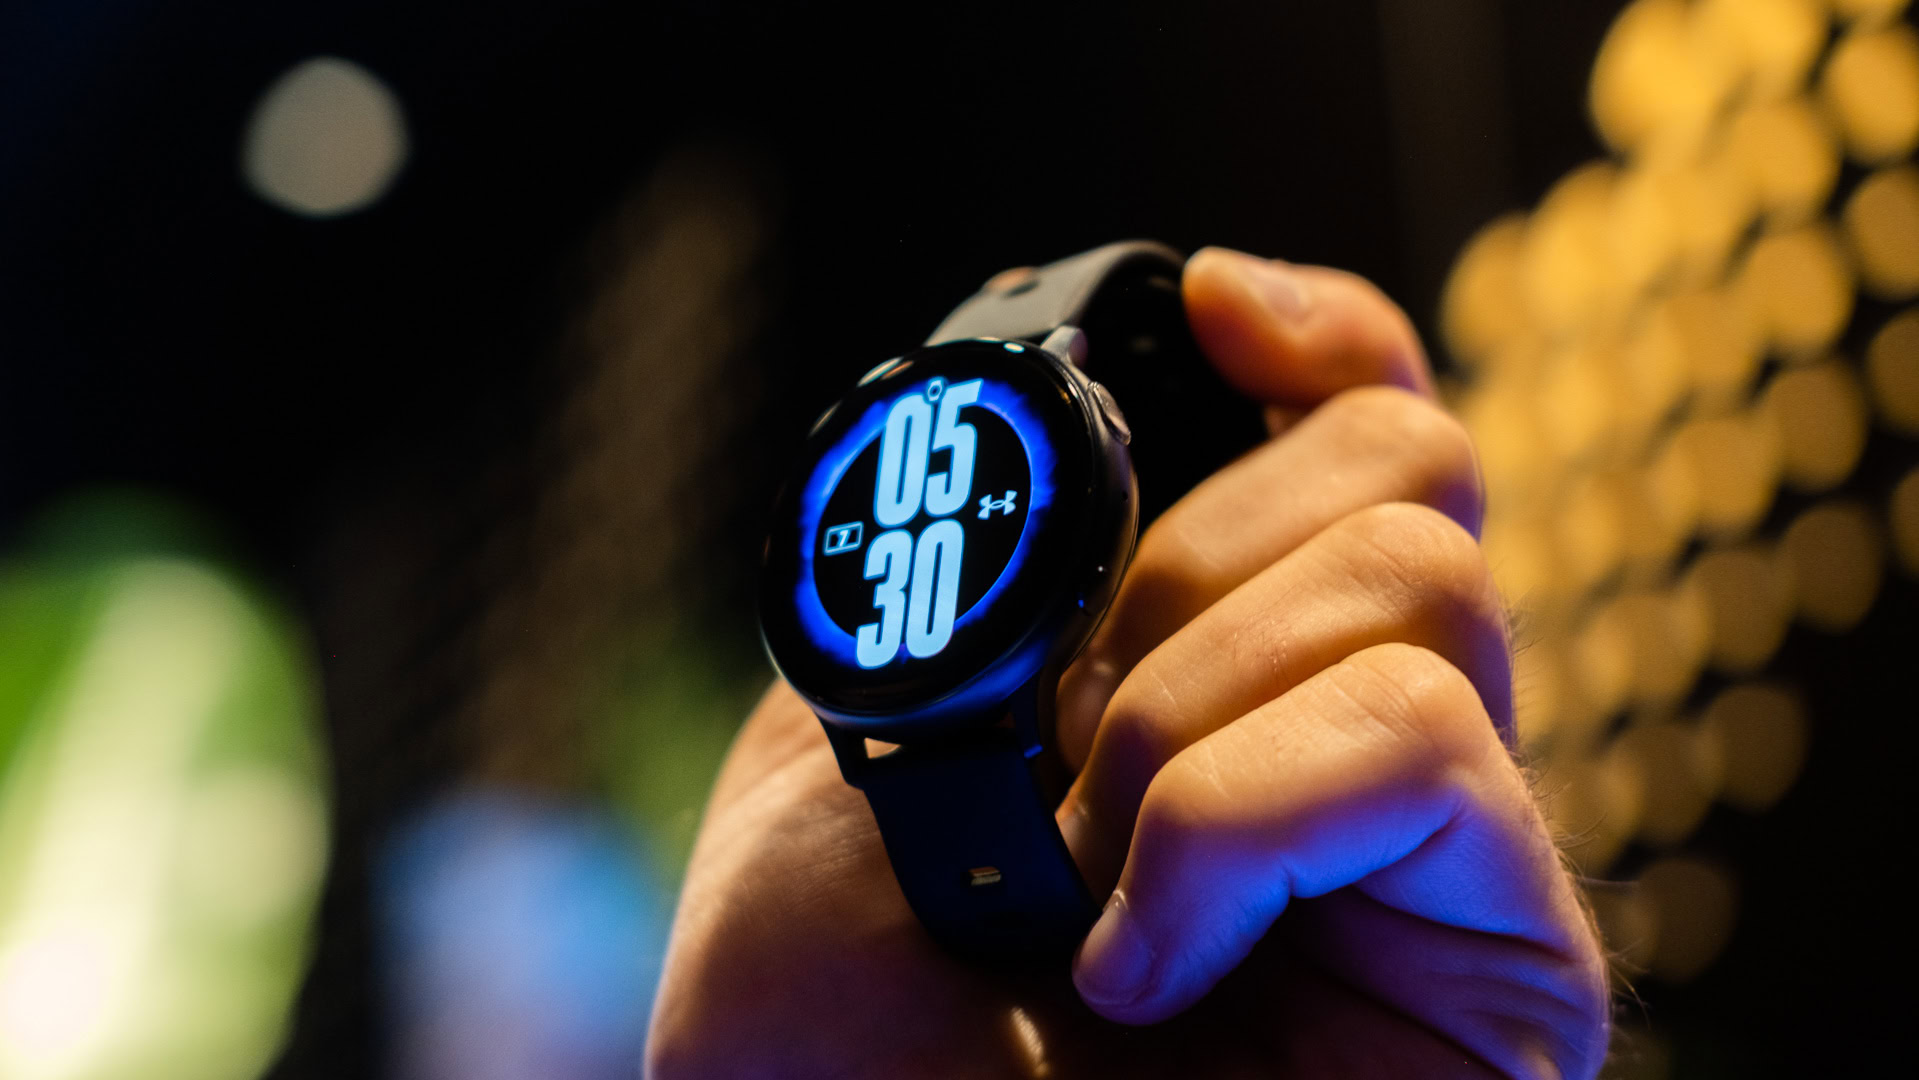 Samsung Galaxy Watch Active 2 features LTE and a touch-enabled bezel